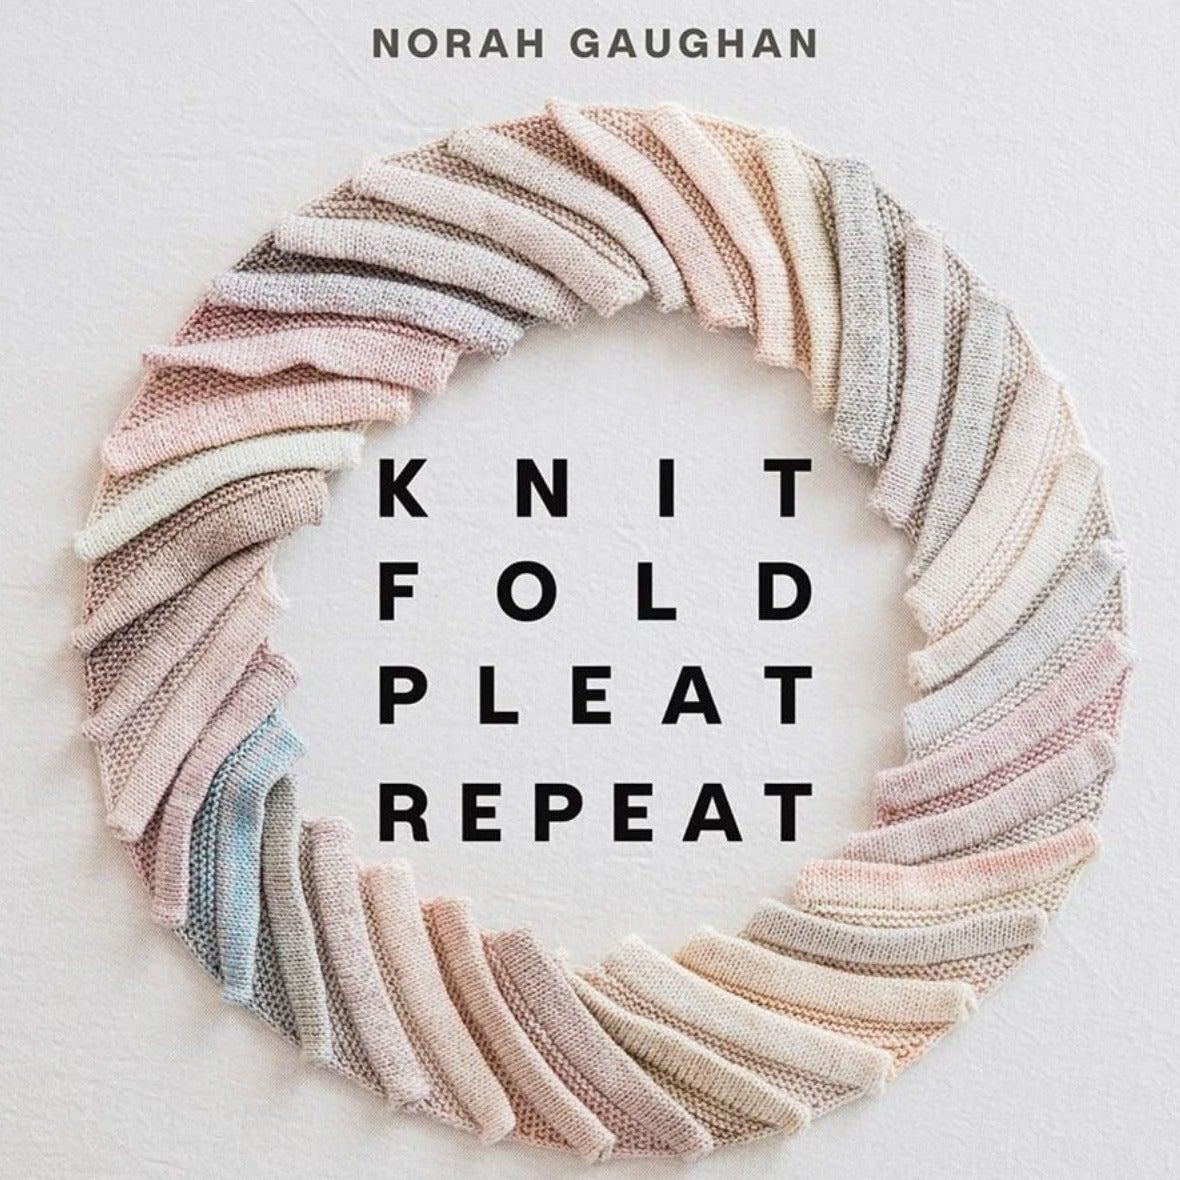 Abrams-Knit Fold Pleat Repeat-book-gather here online